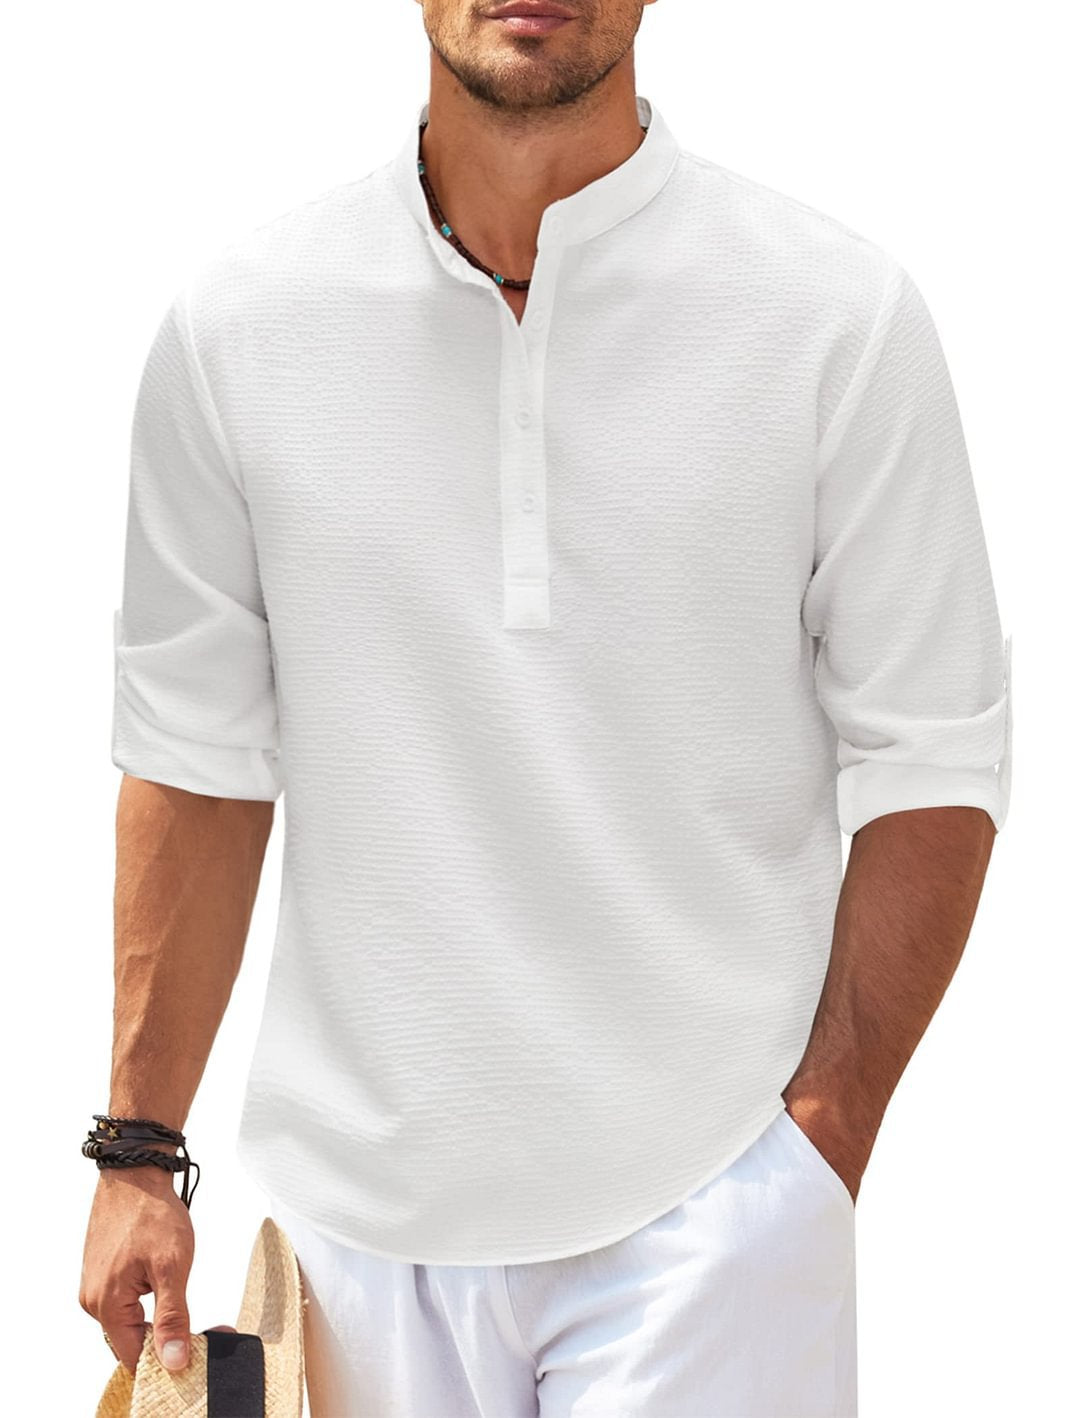 Men's Casual Long Sleeve Shirt Stand Collar Solid Color